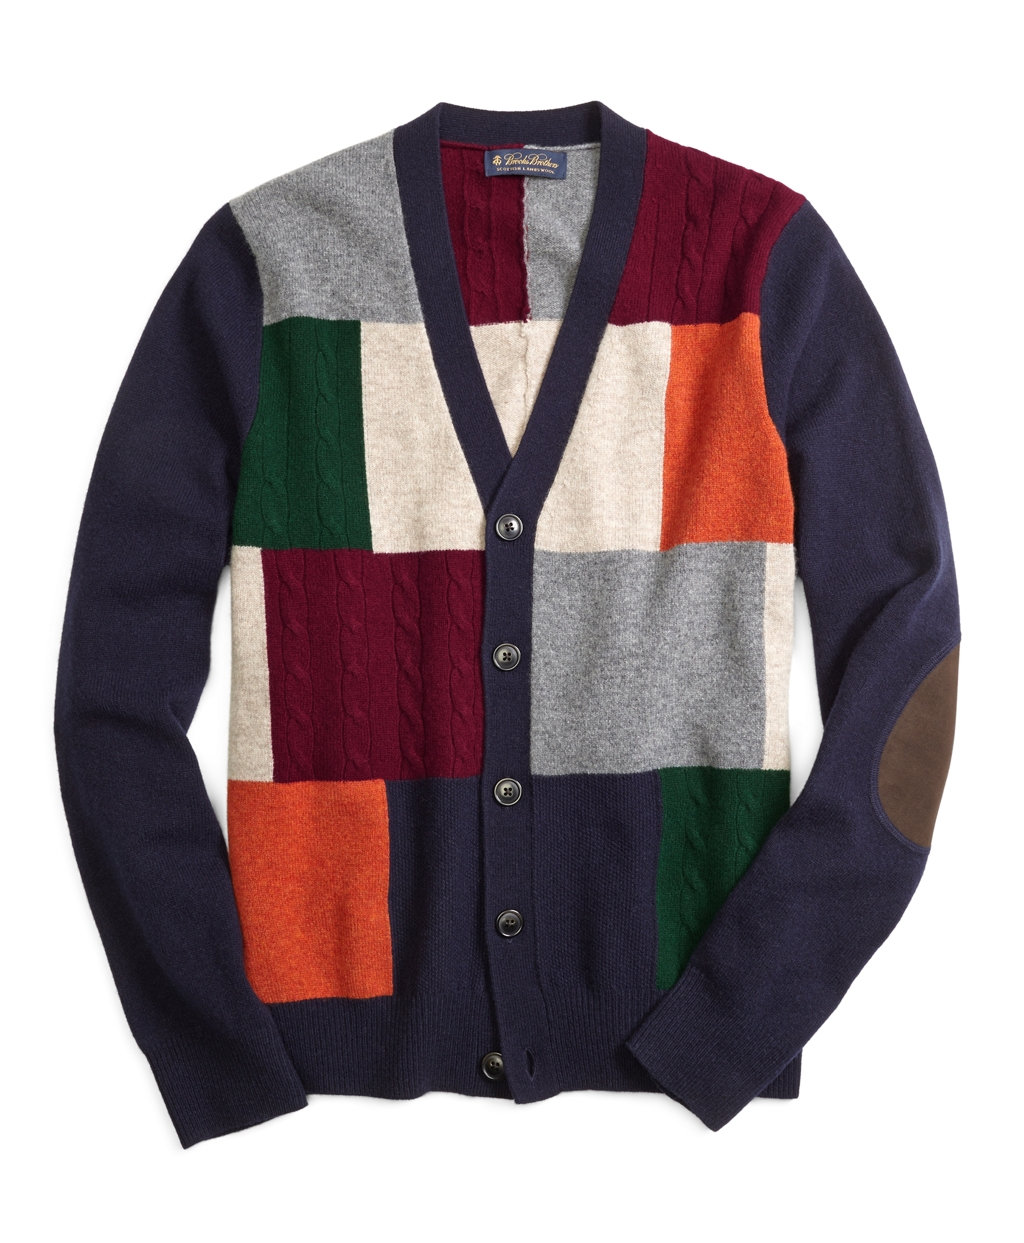 Brooks Brothers Patchwork Cardigan in Blue for Men - Lyst